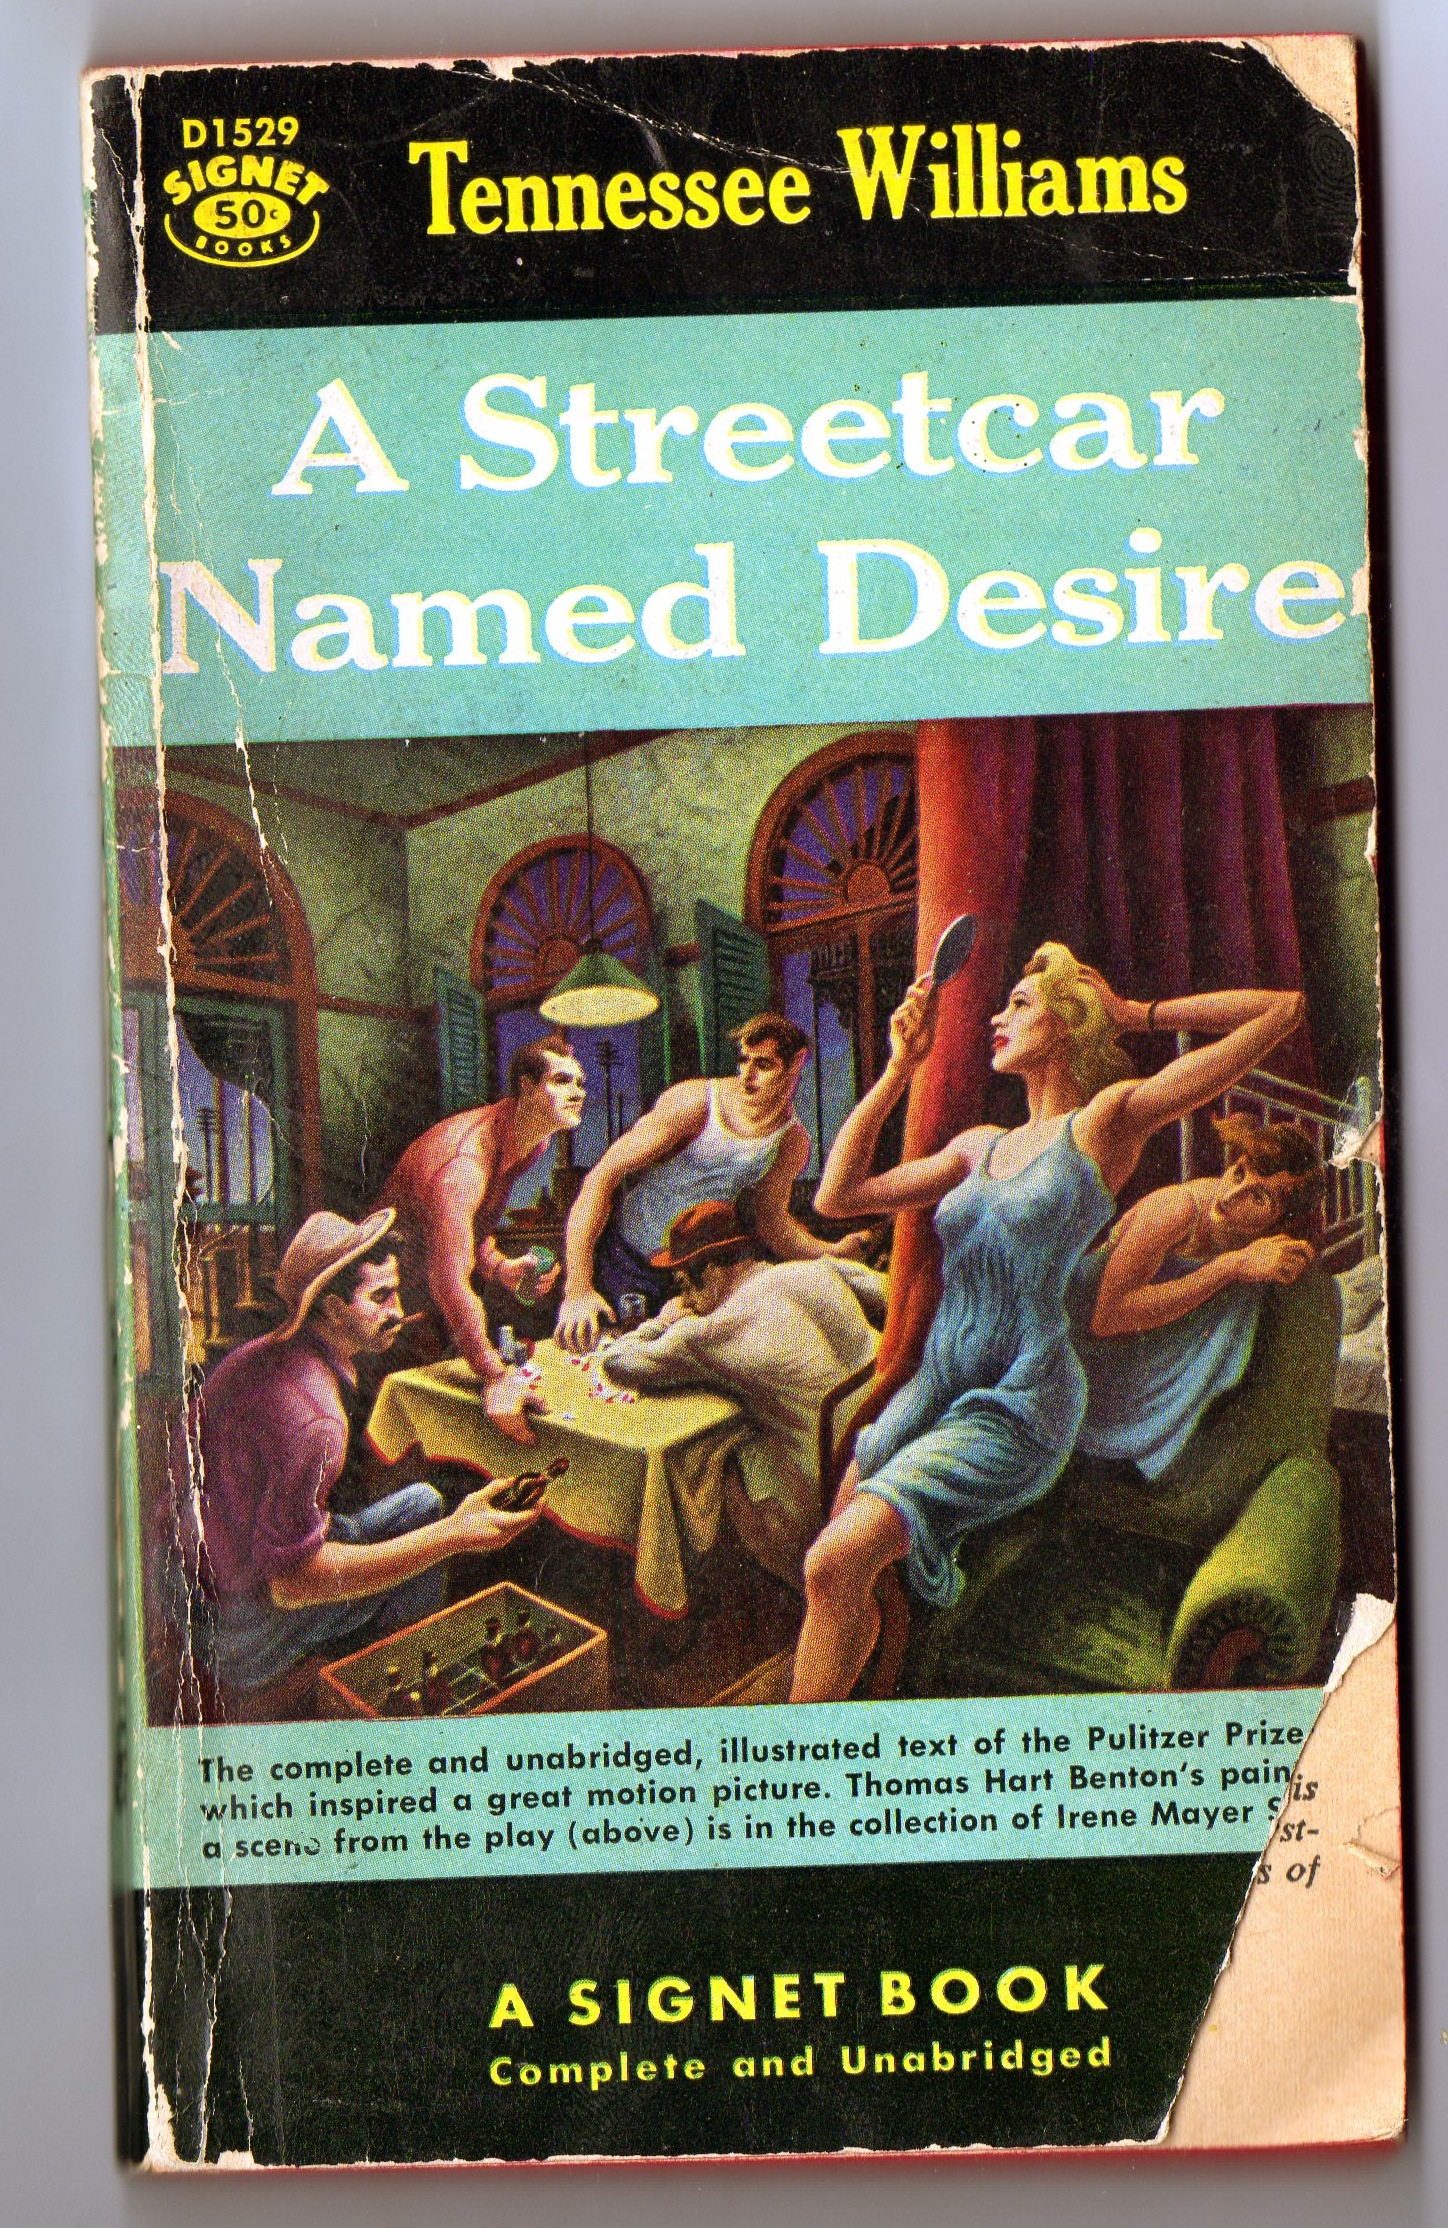 Banned Books: Streetcar Edition